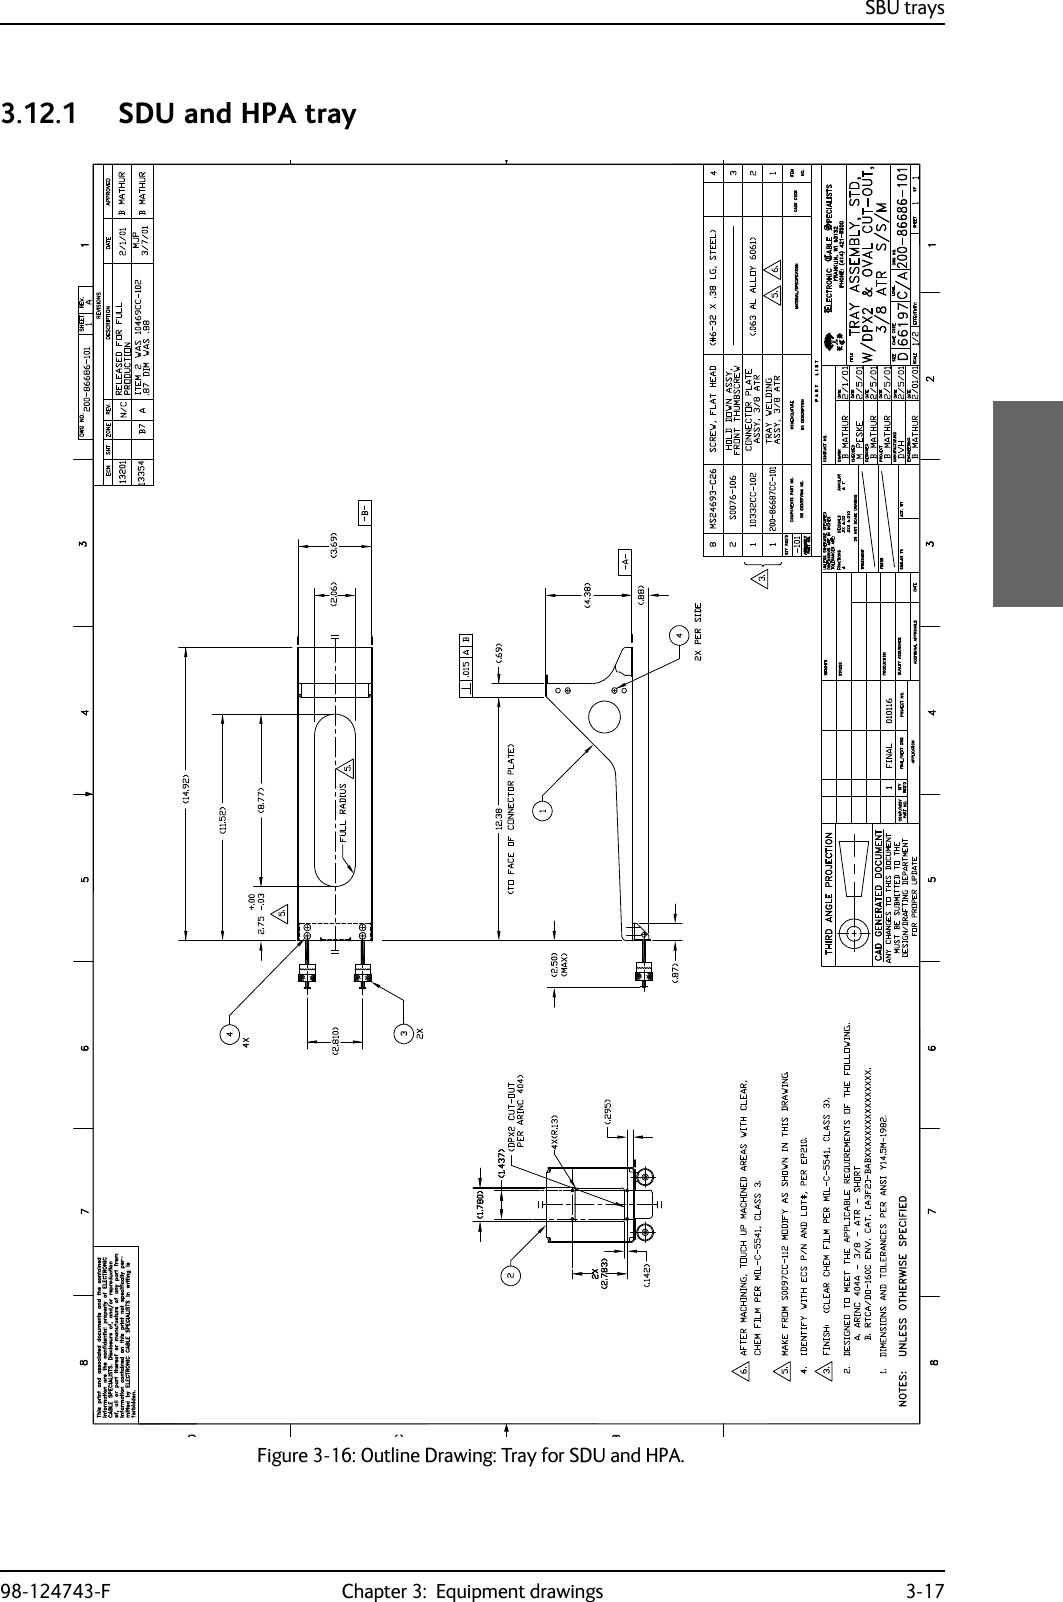 SBU trays98-124743-F Chapter 3:  Equipment drawings 3-173.12.1 SDU and HPA trayFigure 3-16: Outline Drawing: Tray for SDU and HPA.